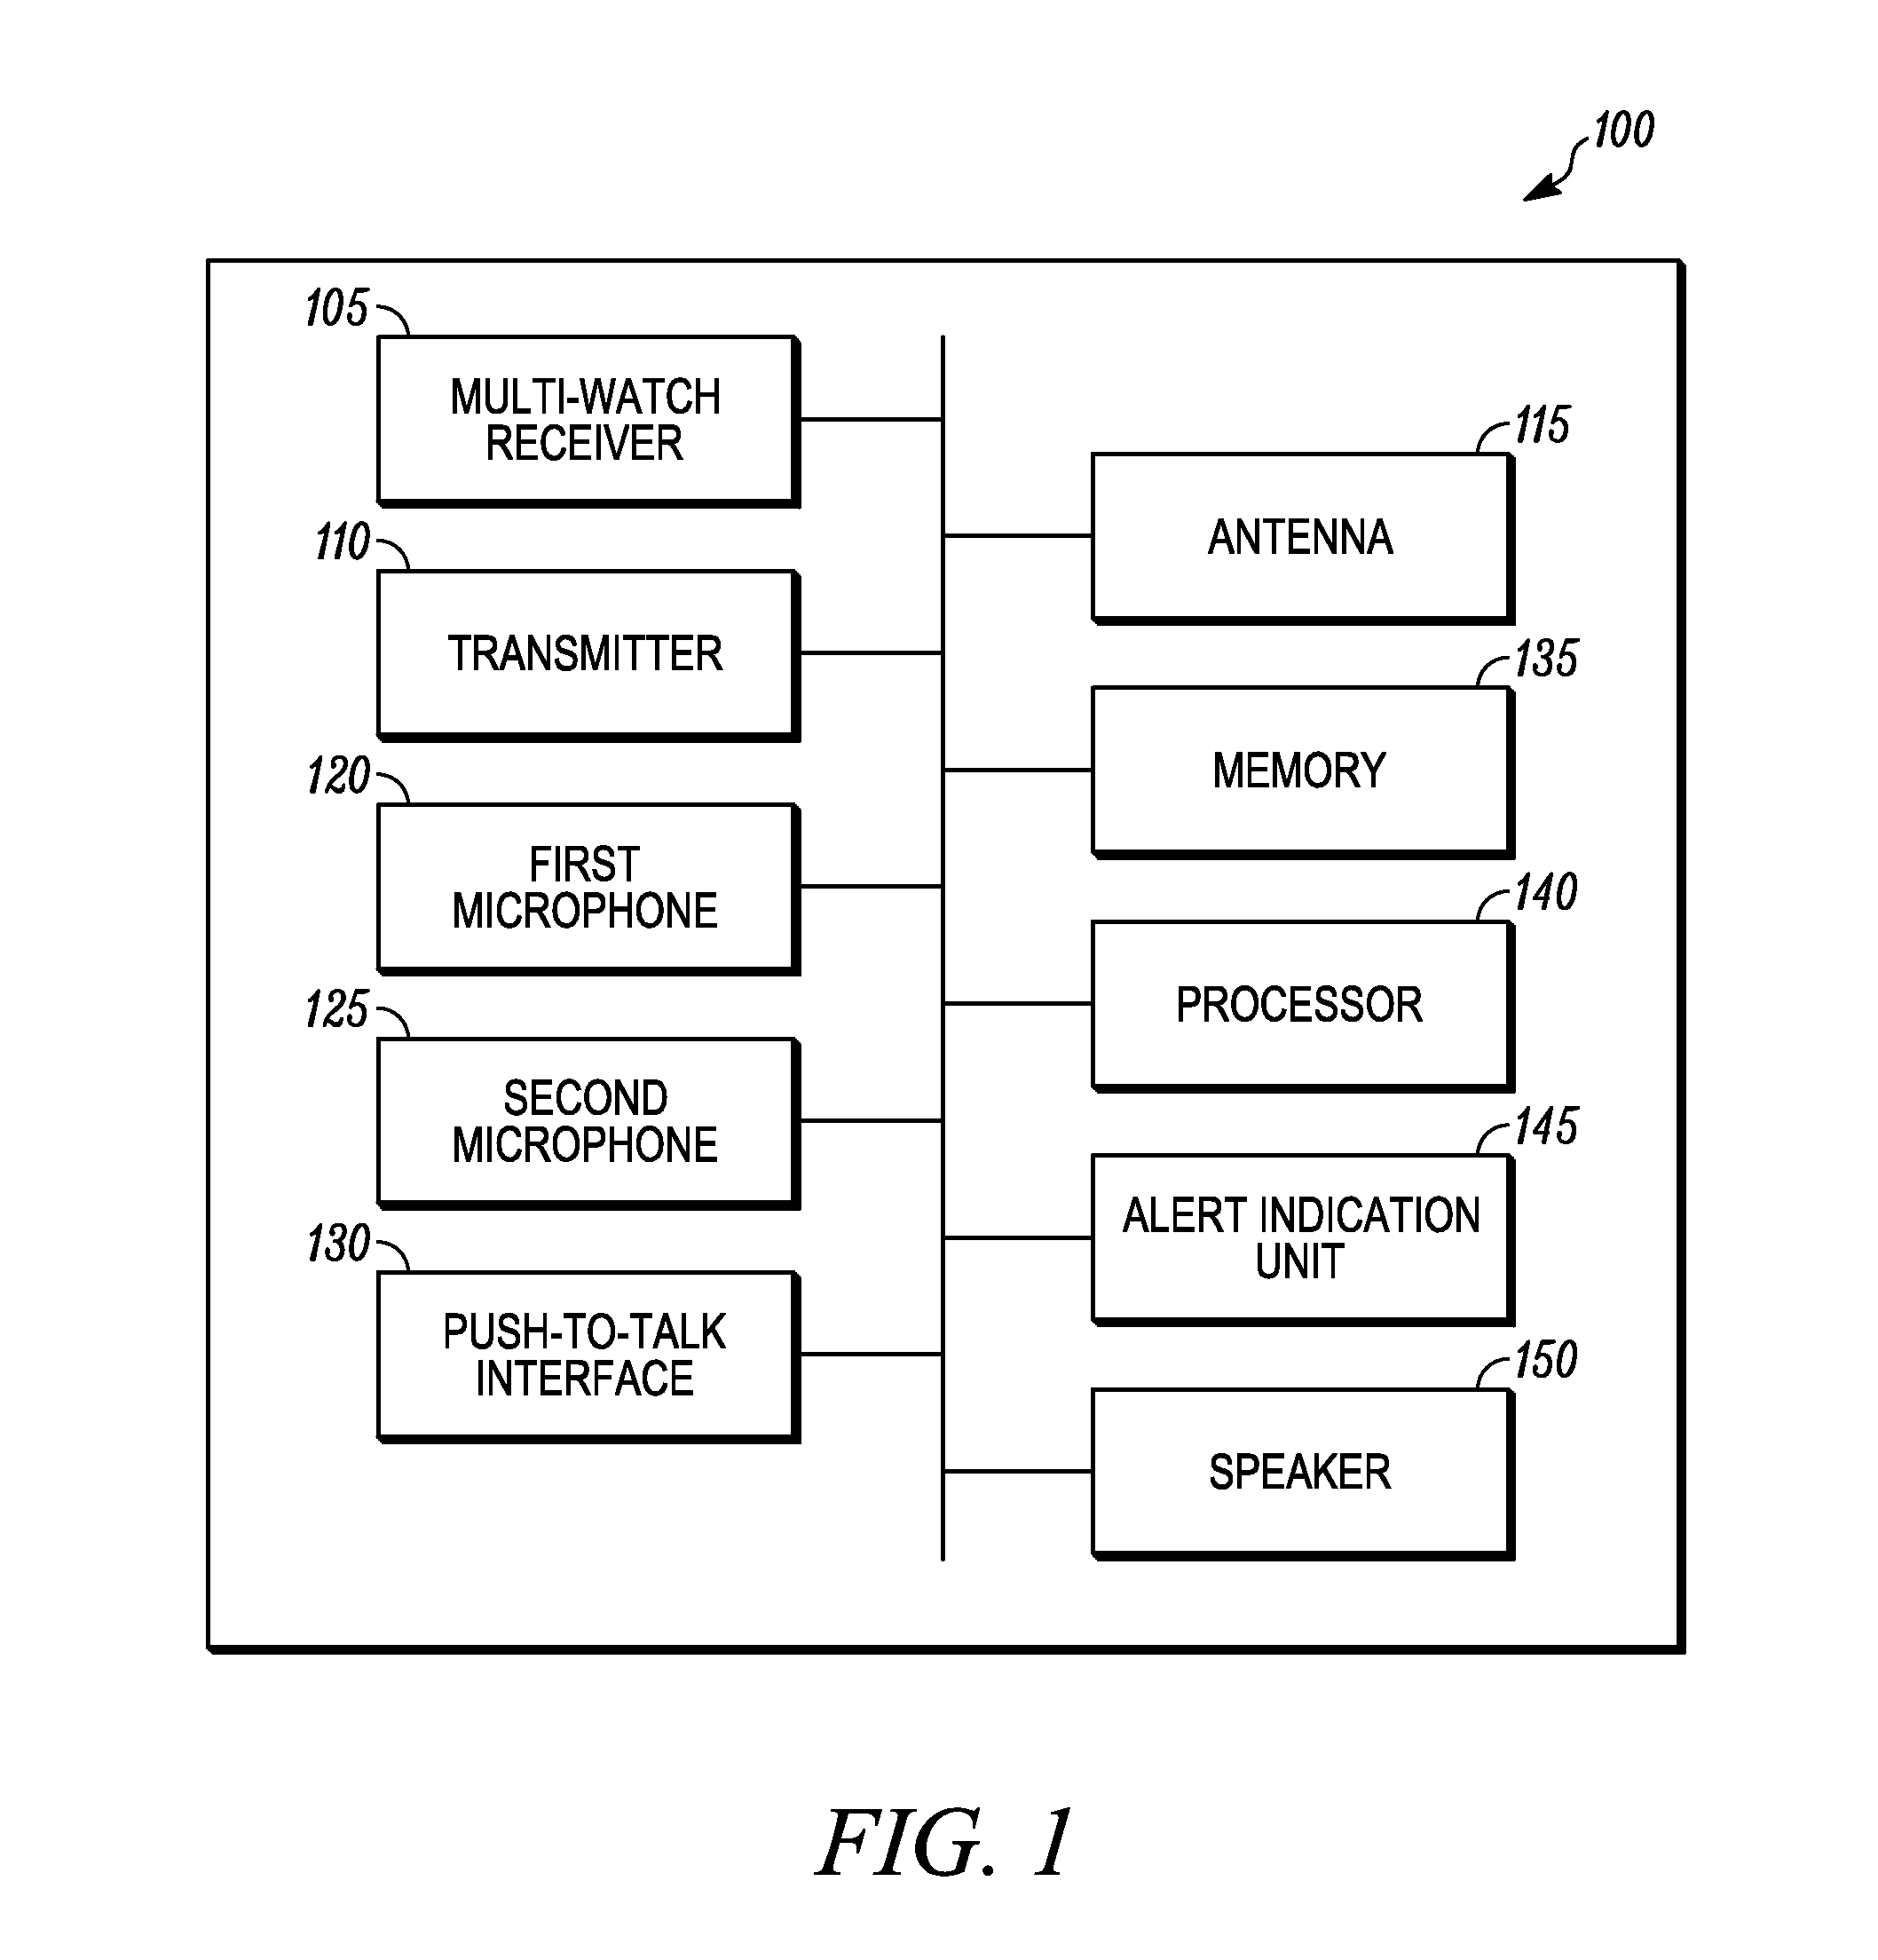 Method for automatically switching to a channel for transmission on a multi-watch portable radio